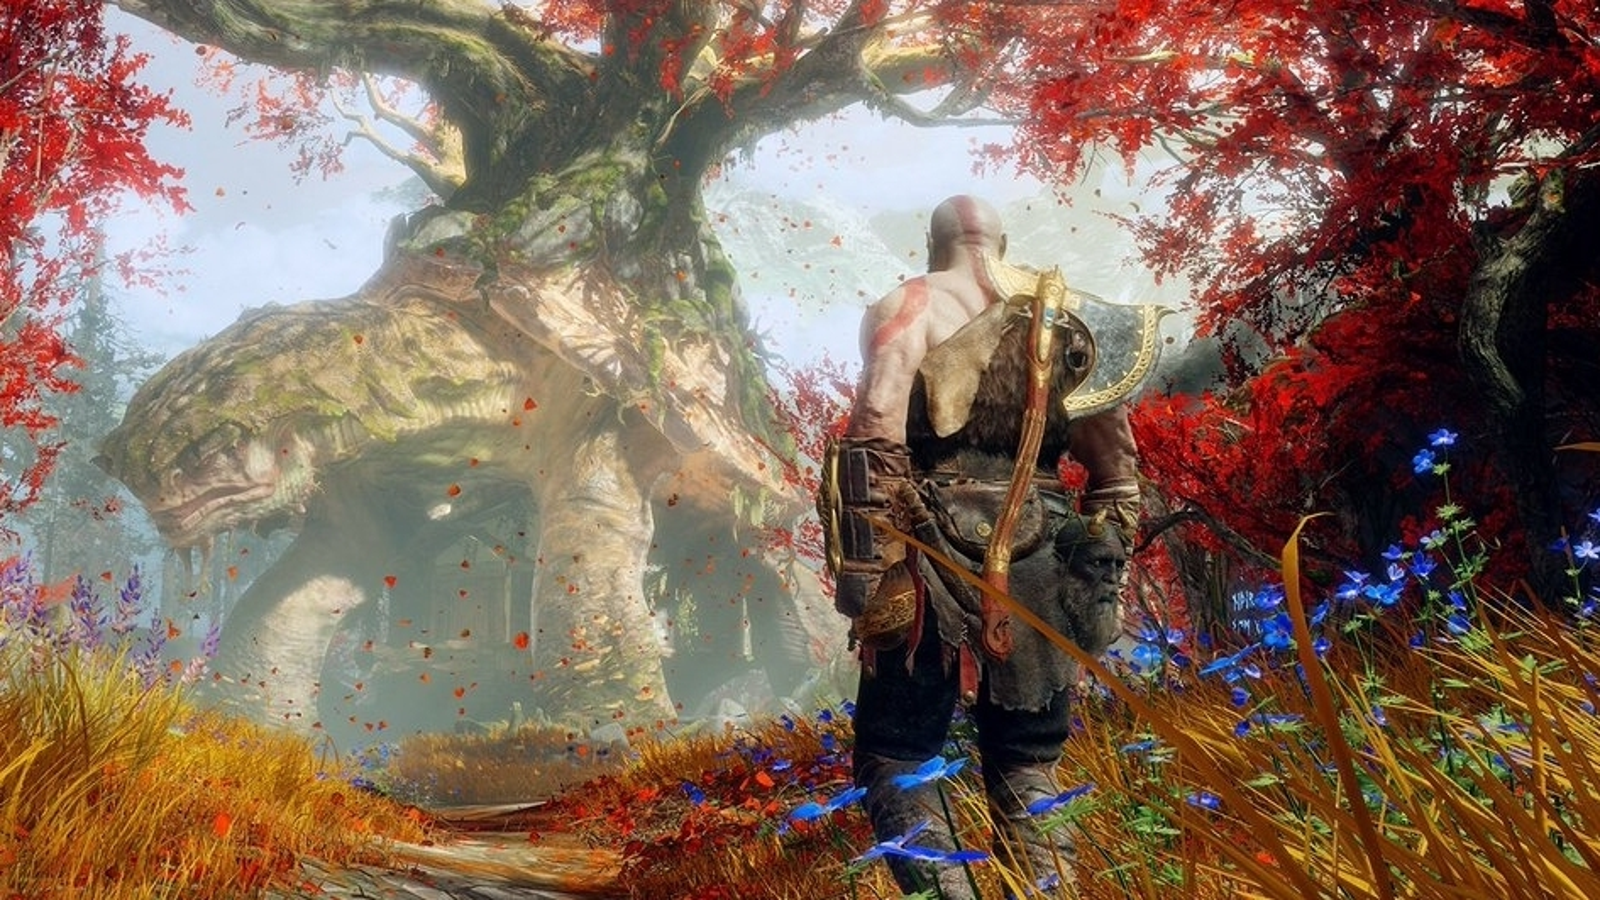 All God of War Ragnarok graphics modes and how to change them on